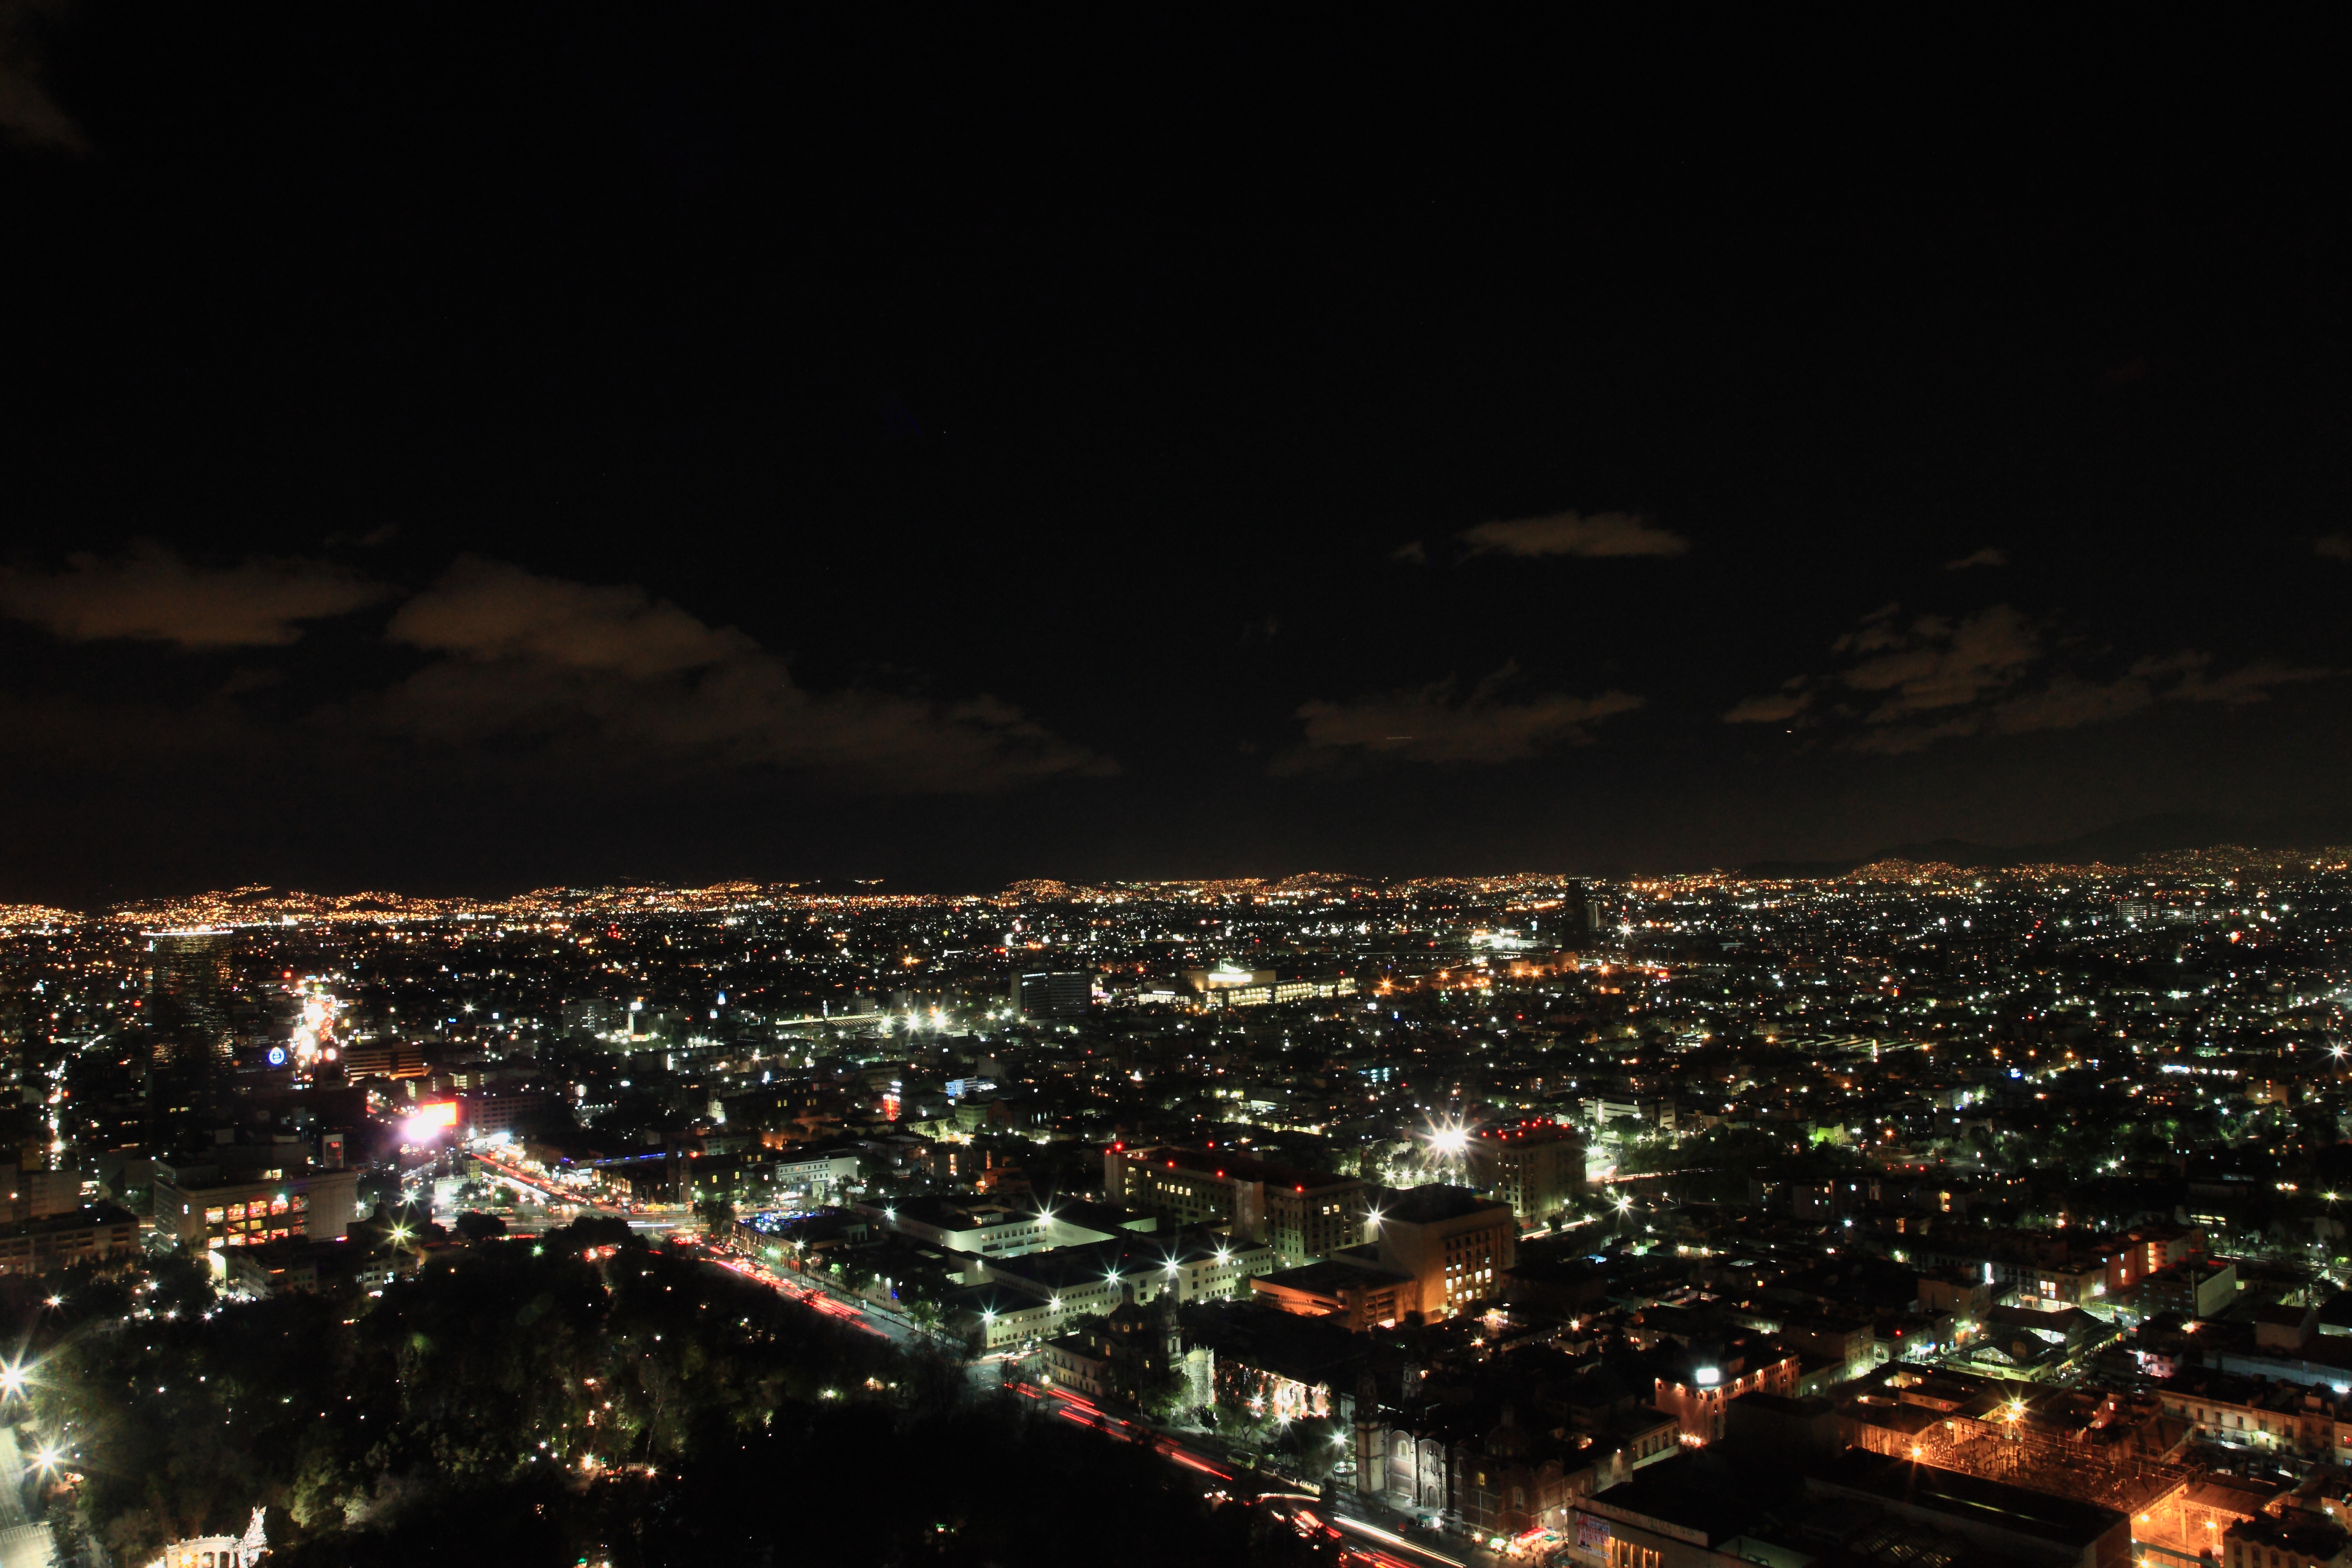 mexico, city lights, view from above, dark, night city